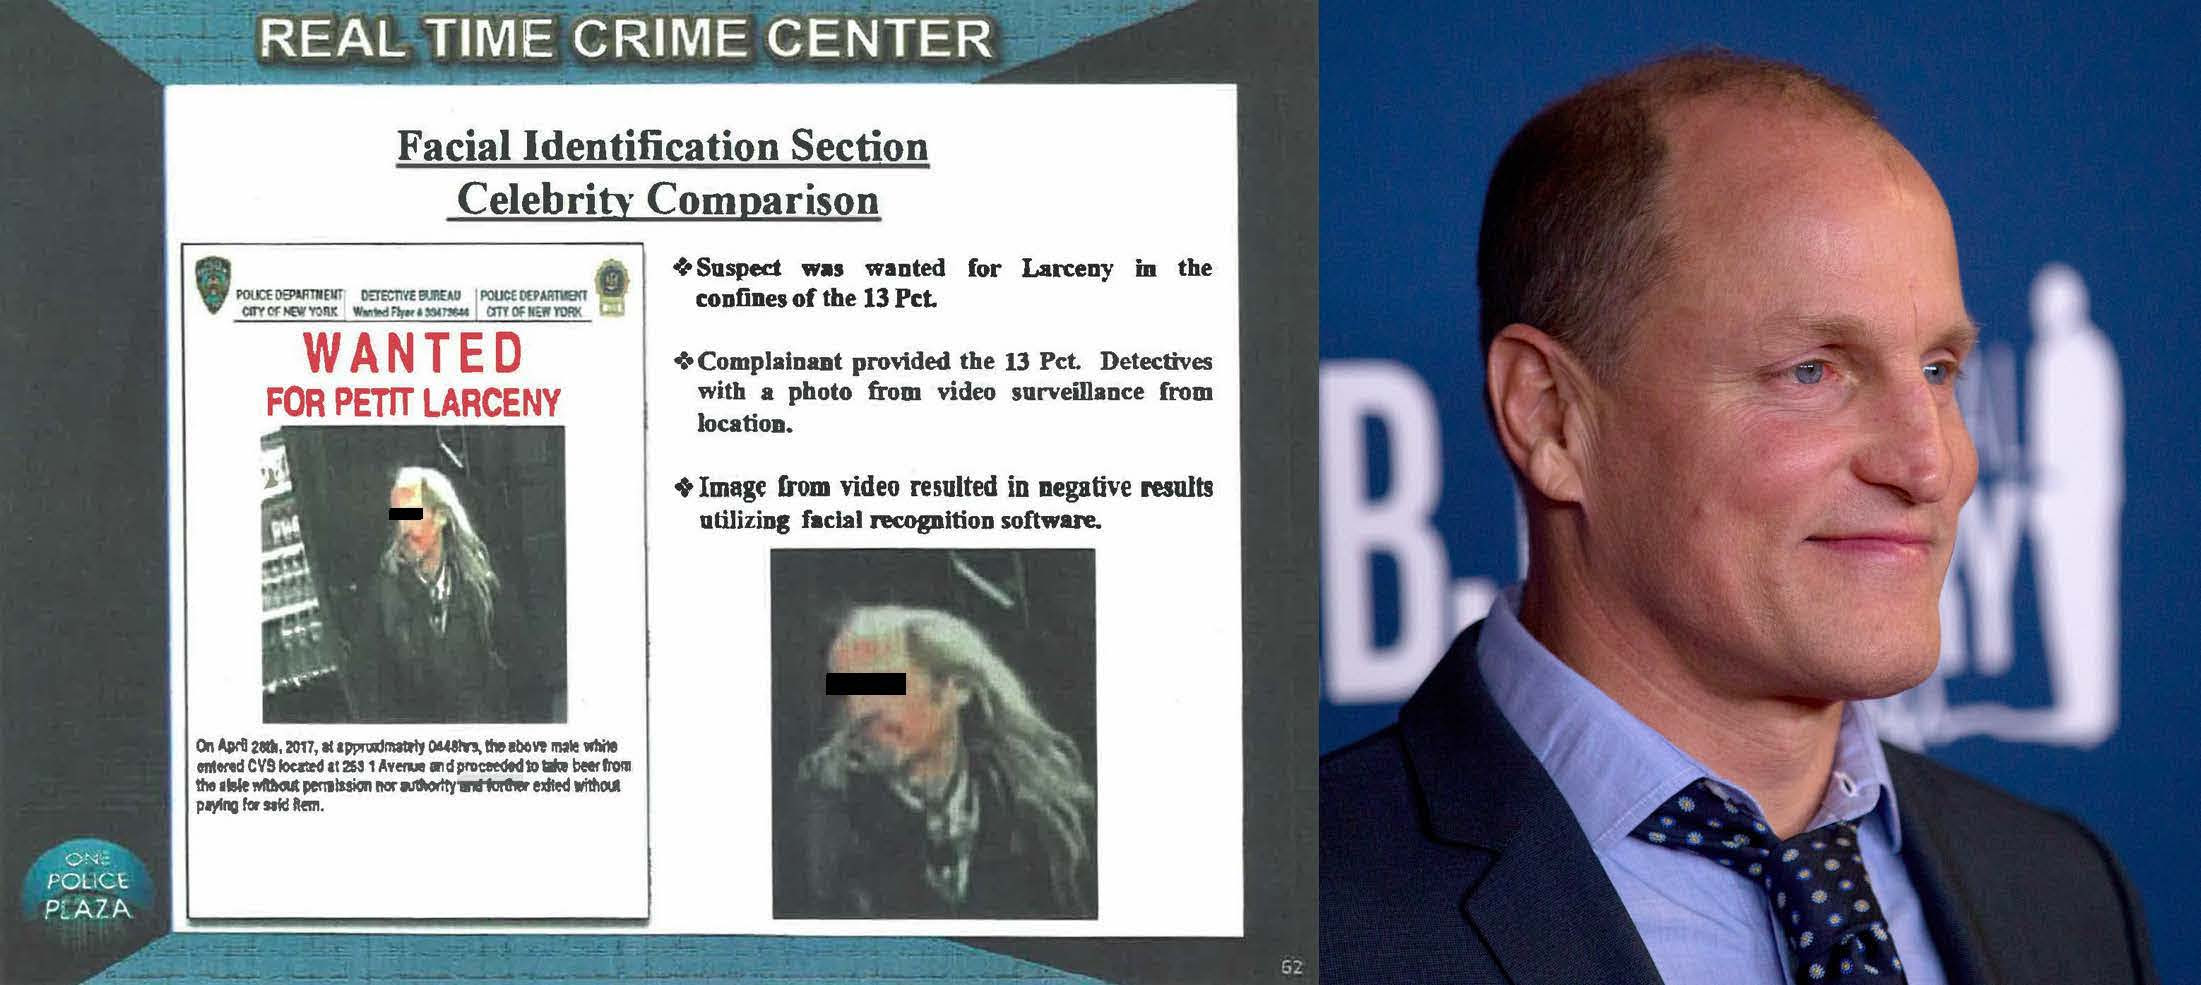 NYPD used a photo of Woody Harrelson to identify an alleged robbery suspect.